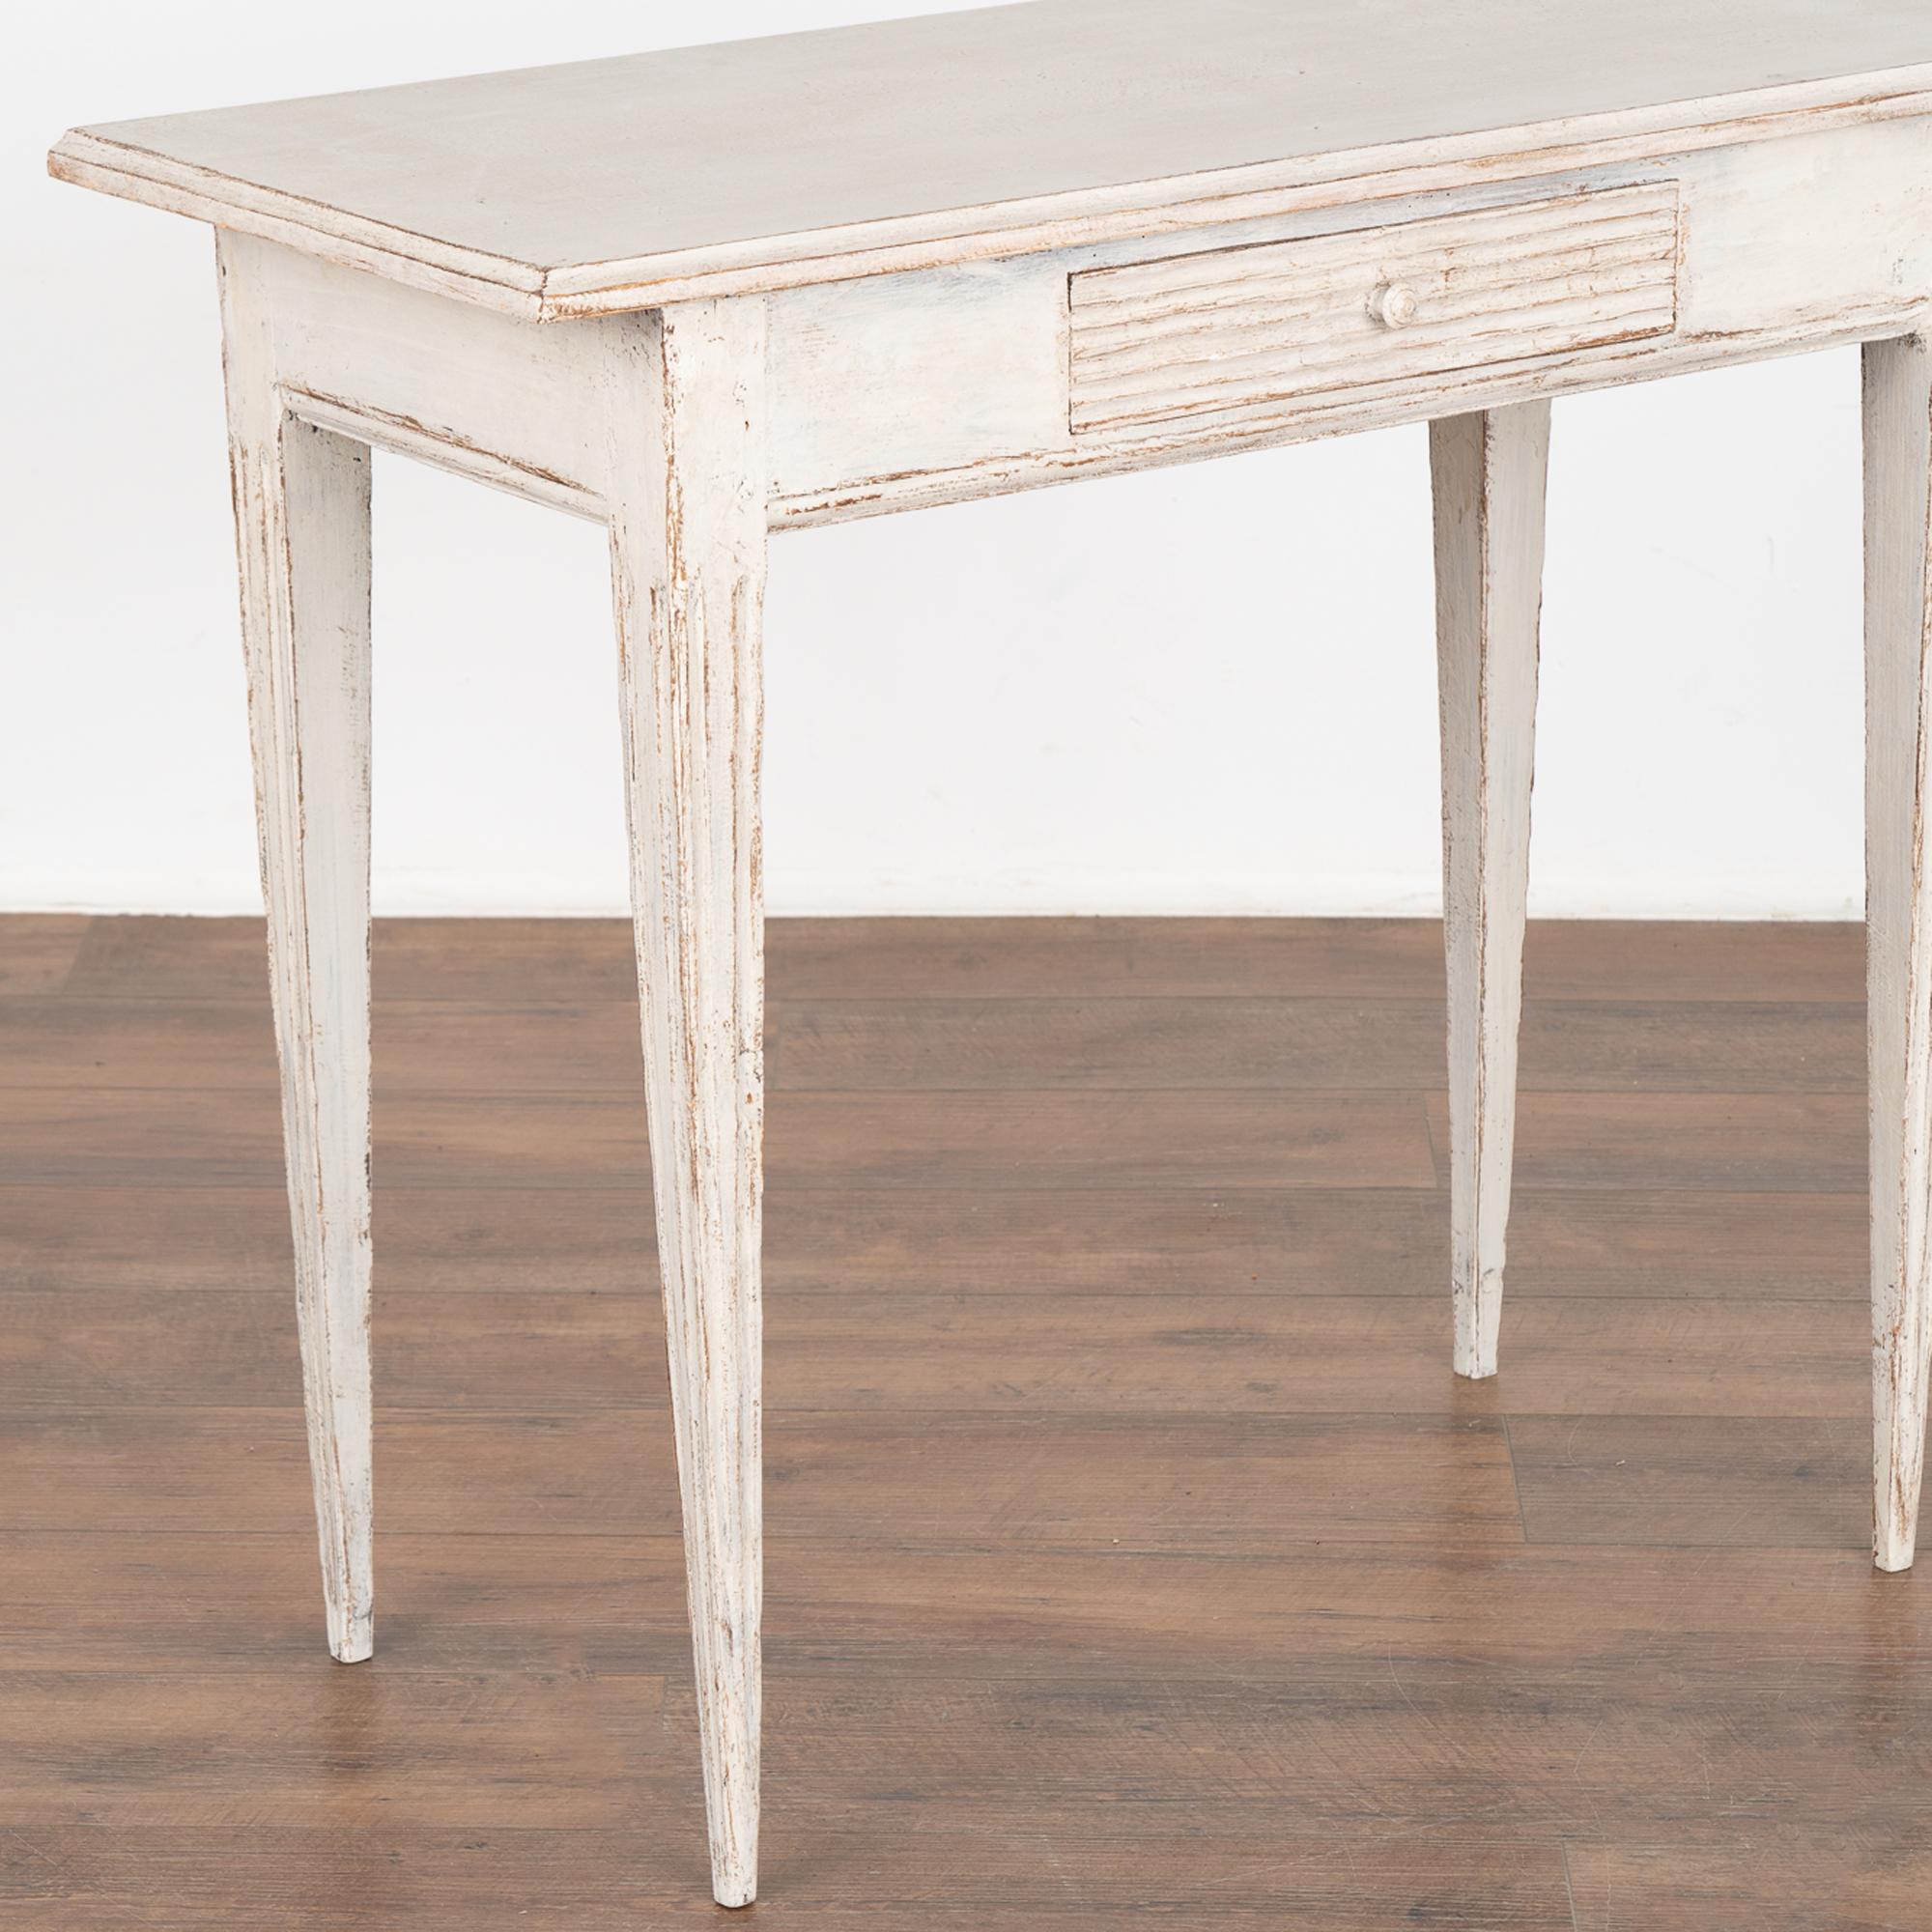 Pine Gustavian White Painted Side Table with Drawer, Sweden circa 1820-1840